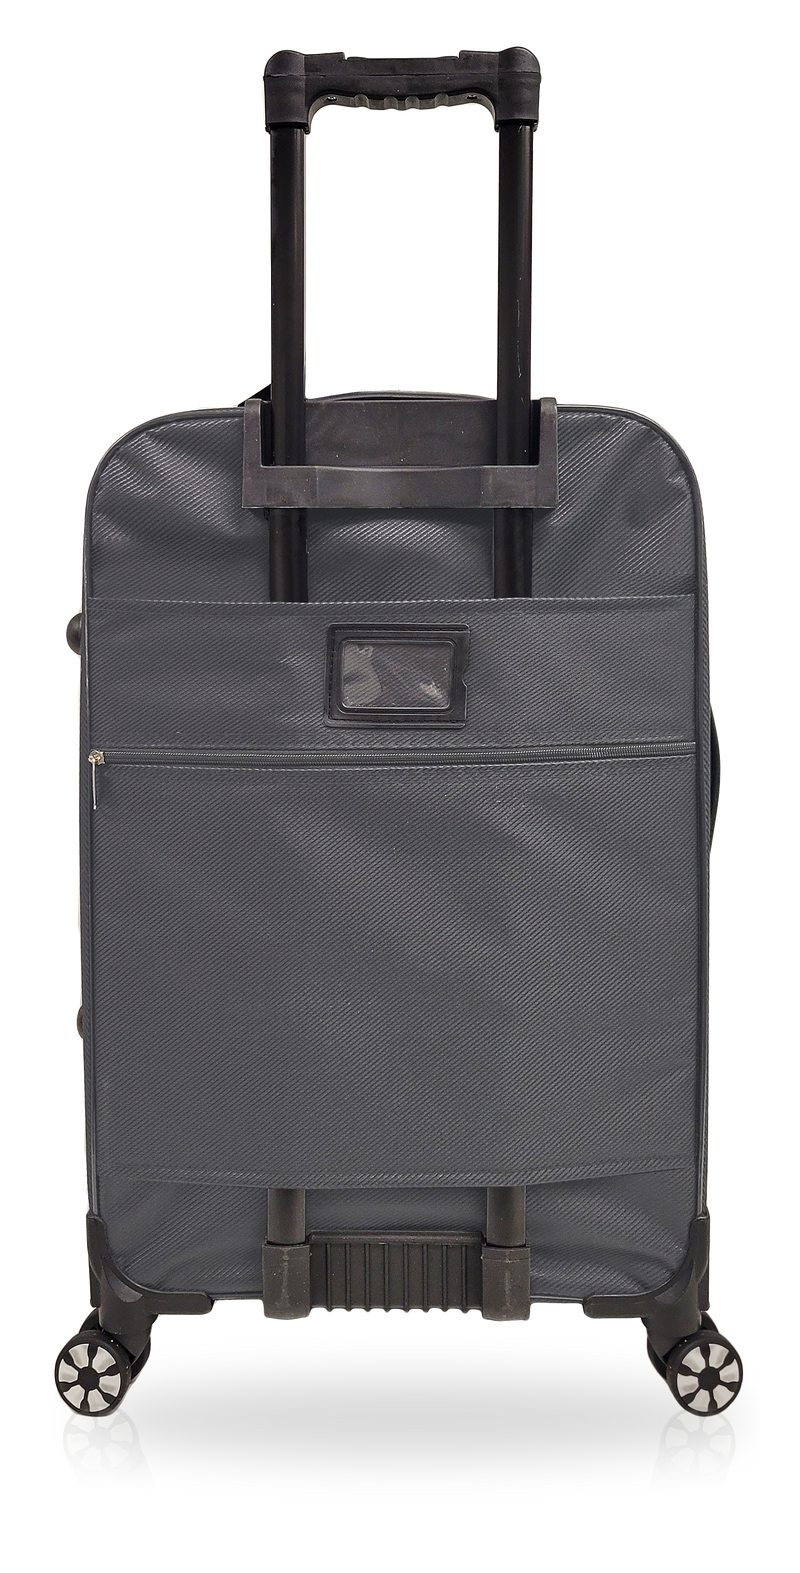 TOSCANO by Tucci Crociato 21-inch Lightweight Luggage Suitcase